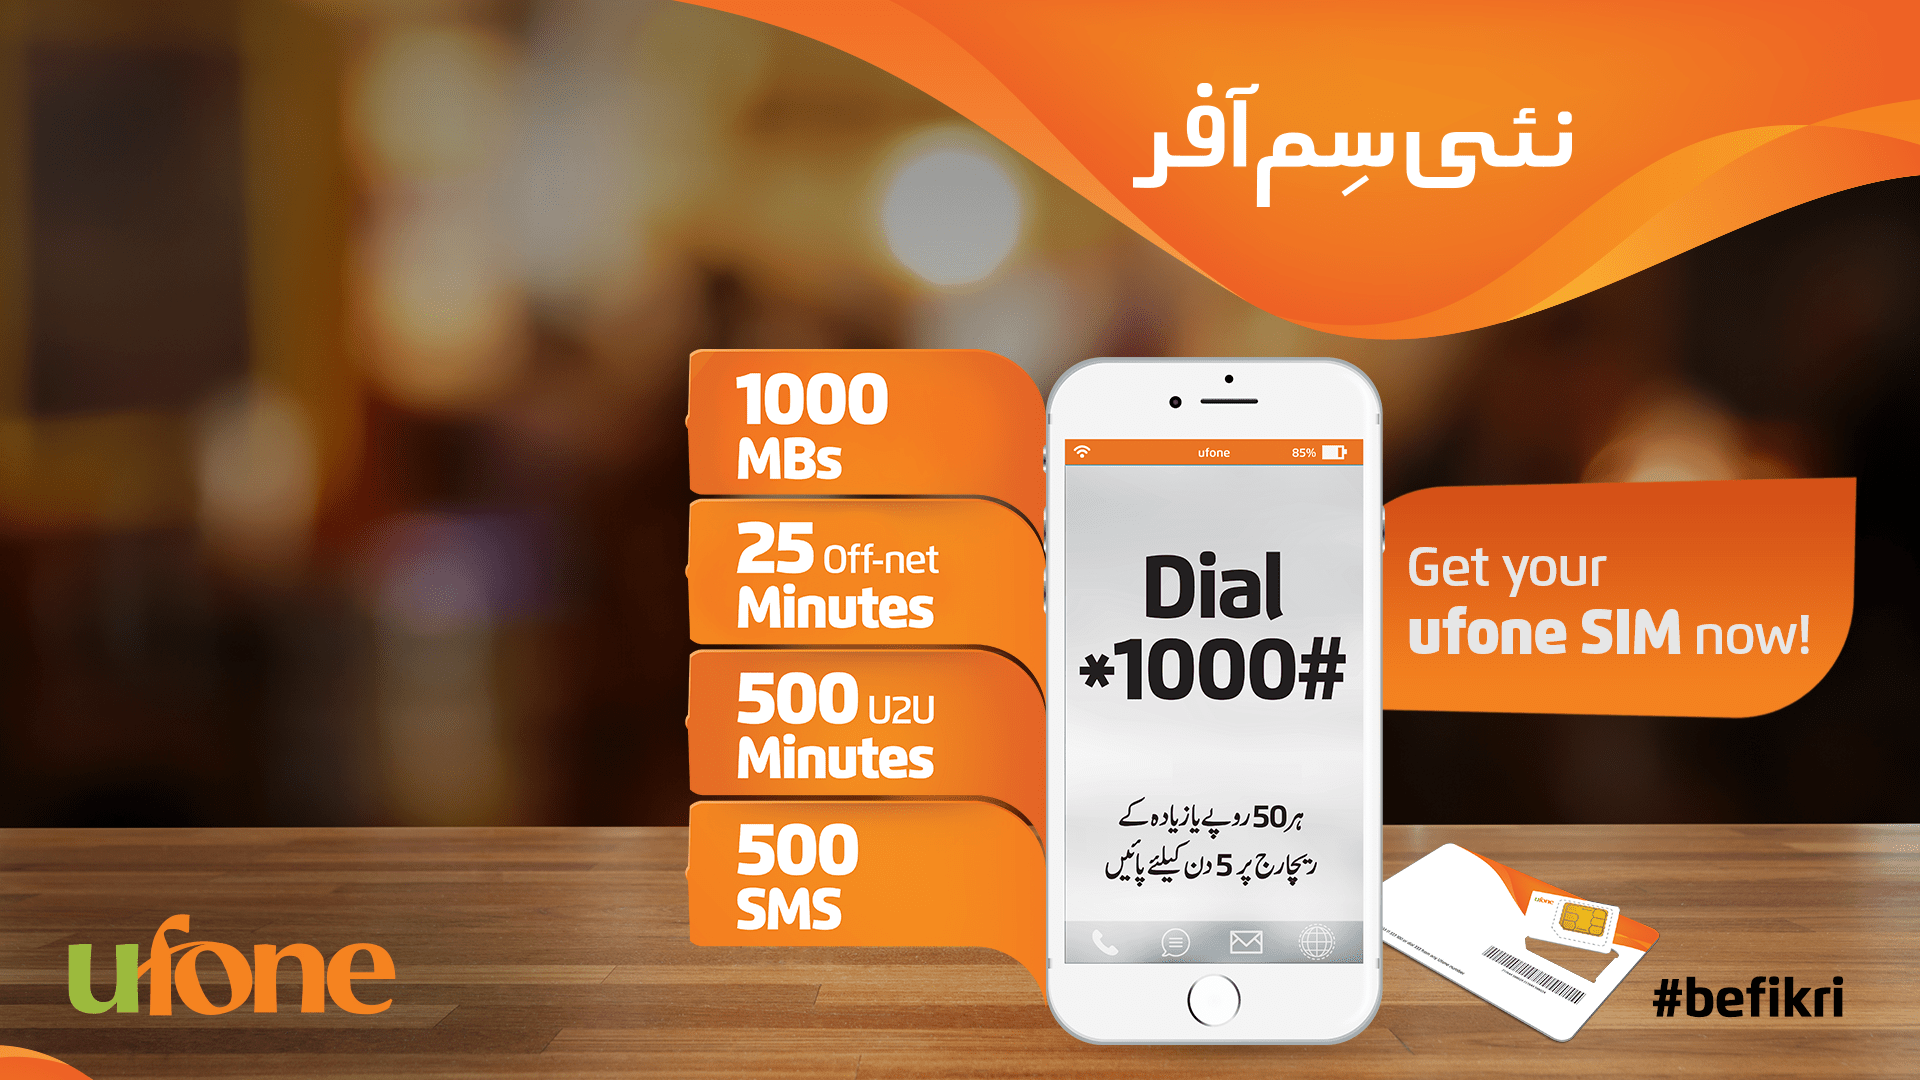 Ufone unveils an attractive new SIM promotion